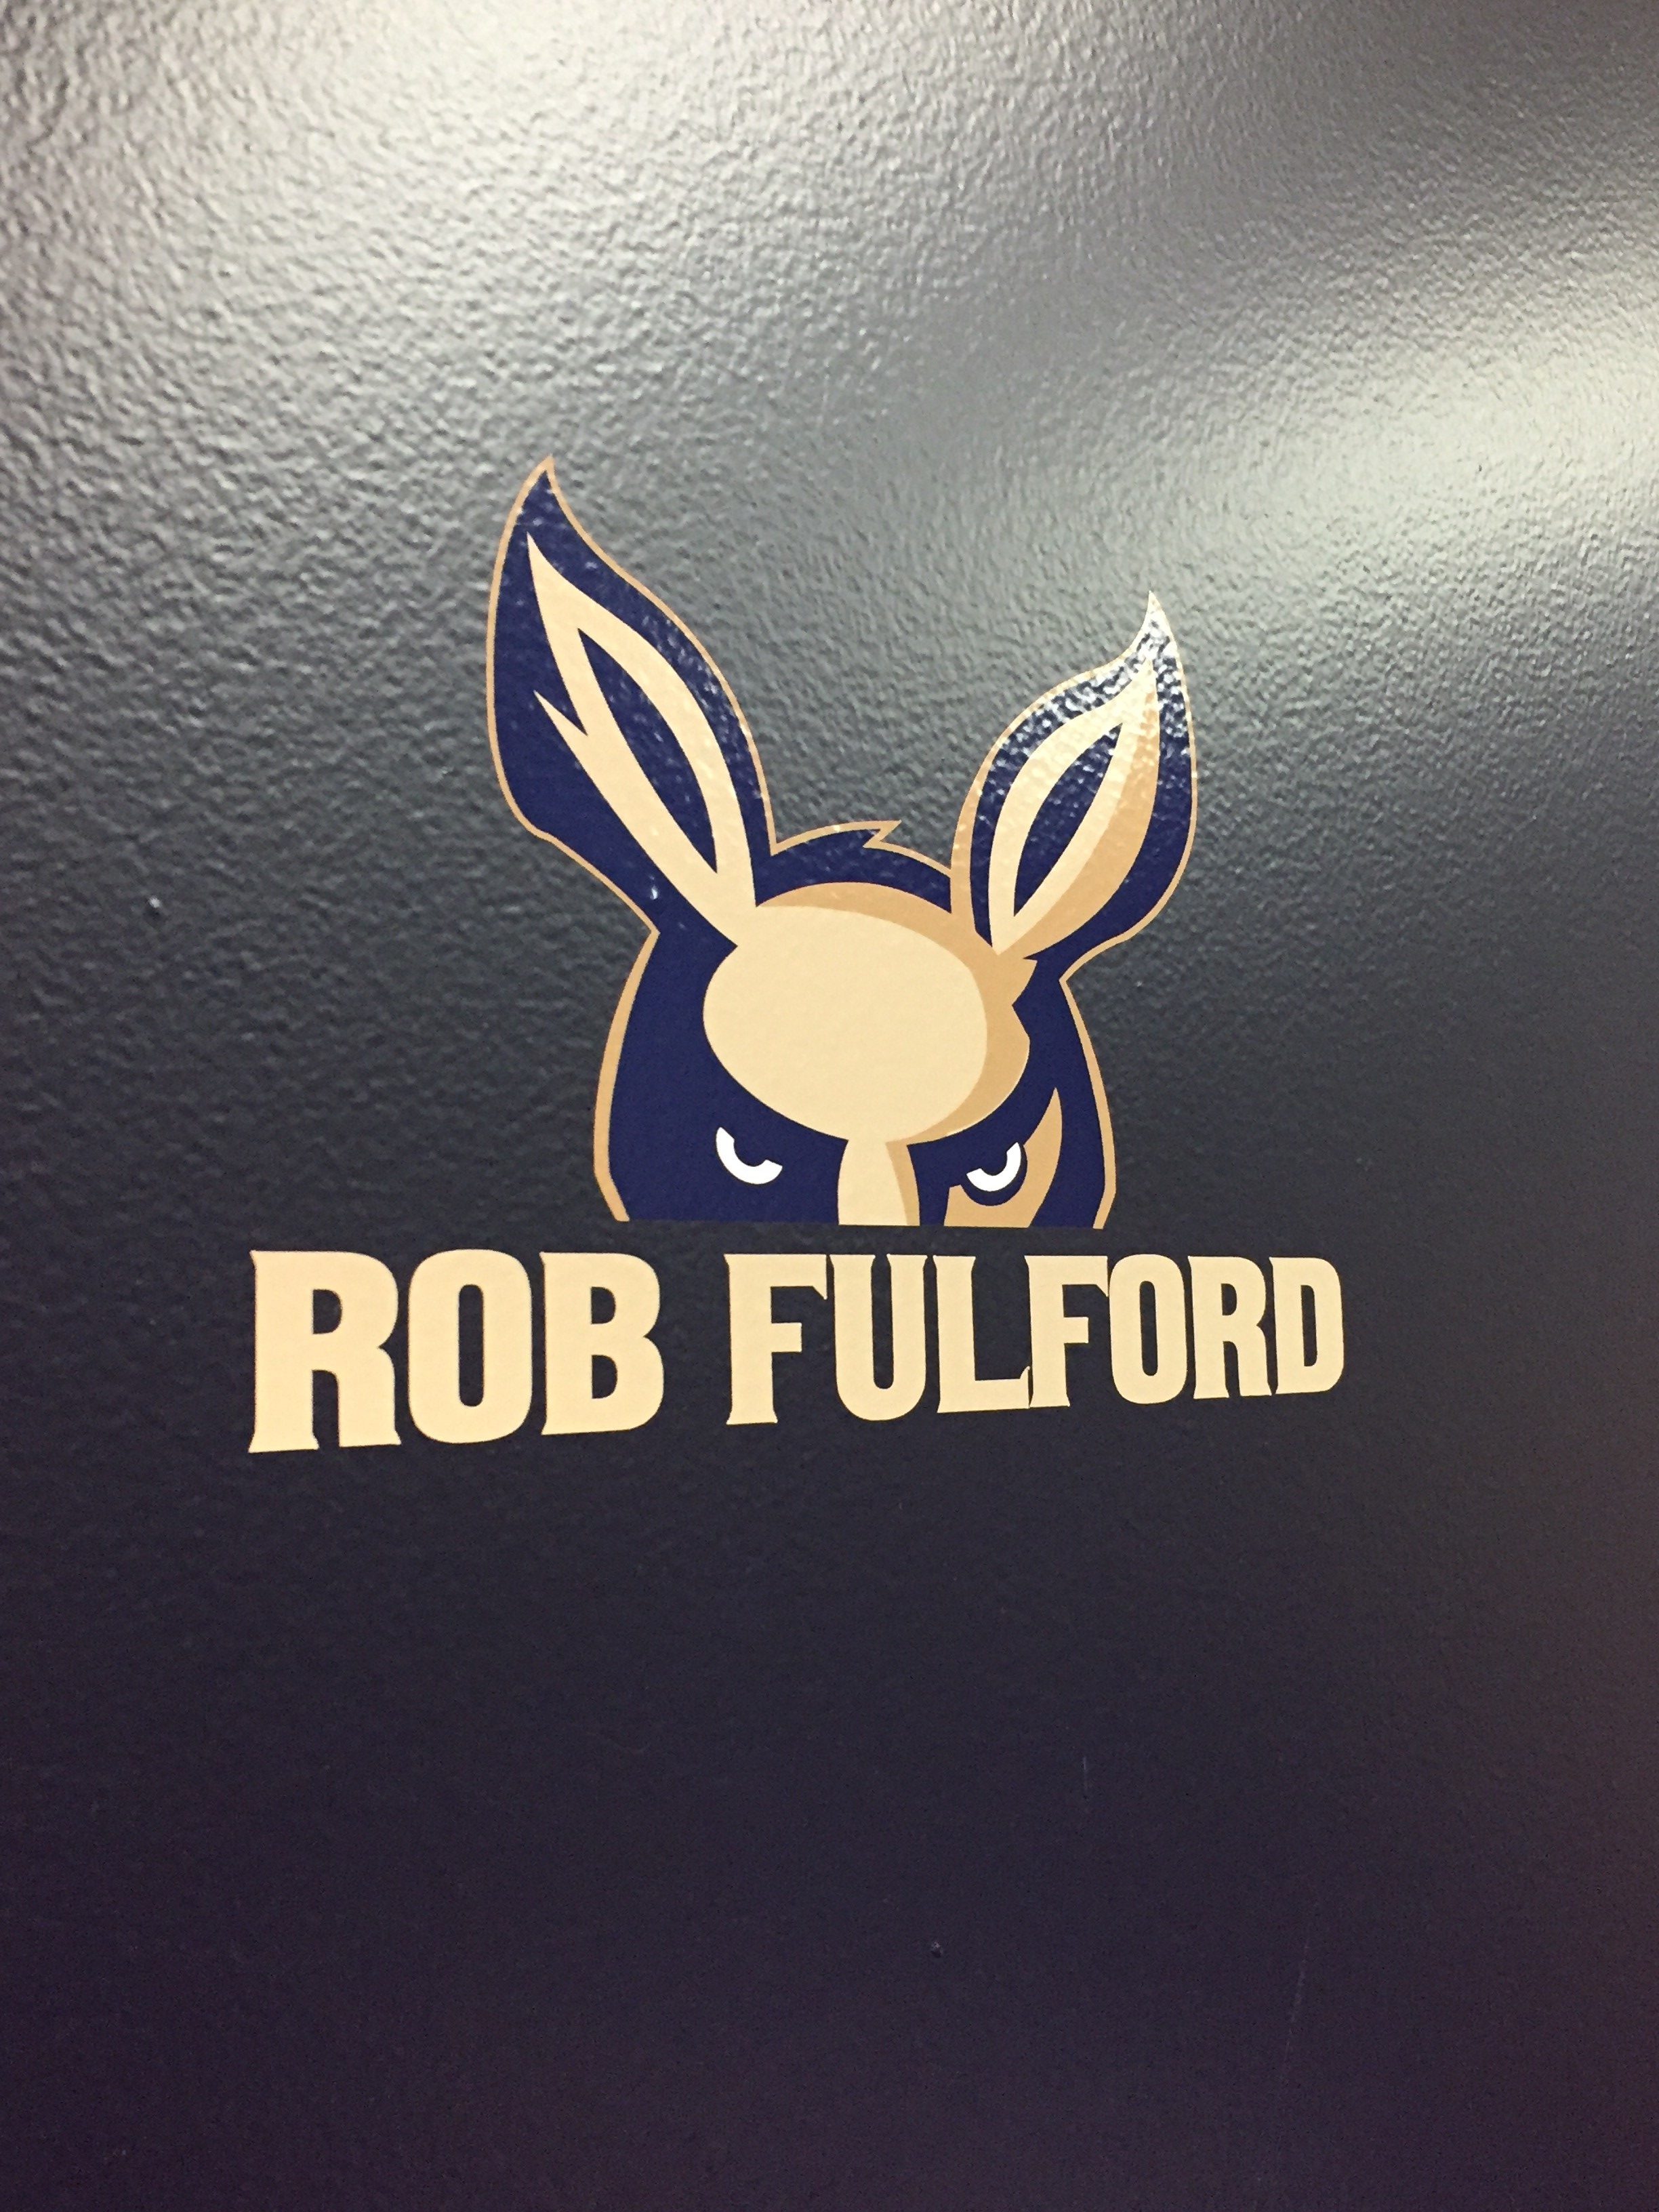 Animal wall graphic with Rob Fulford